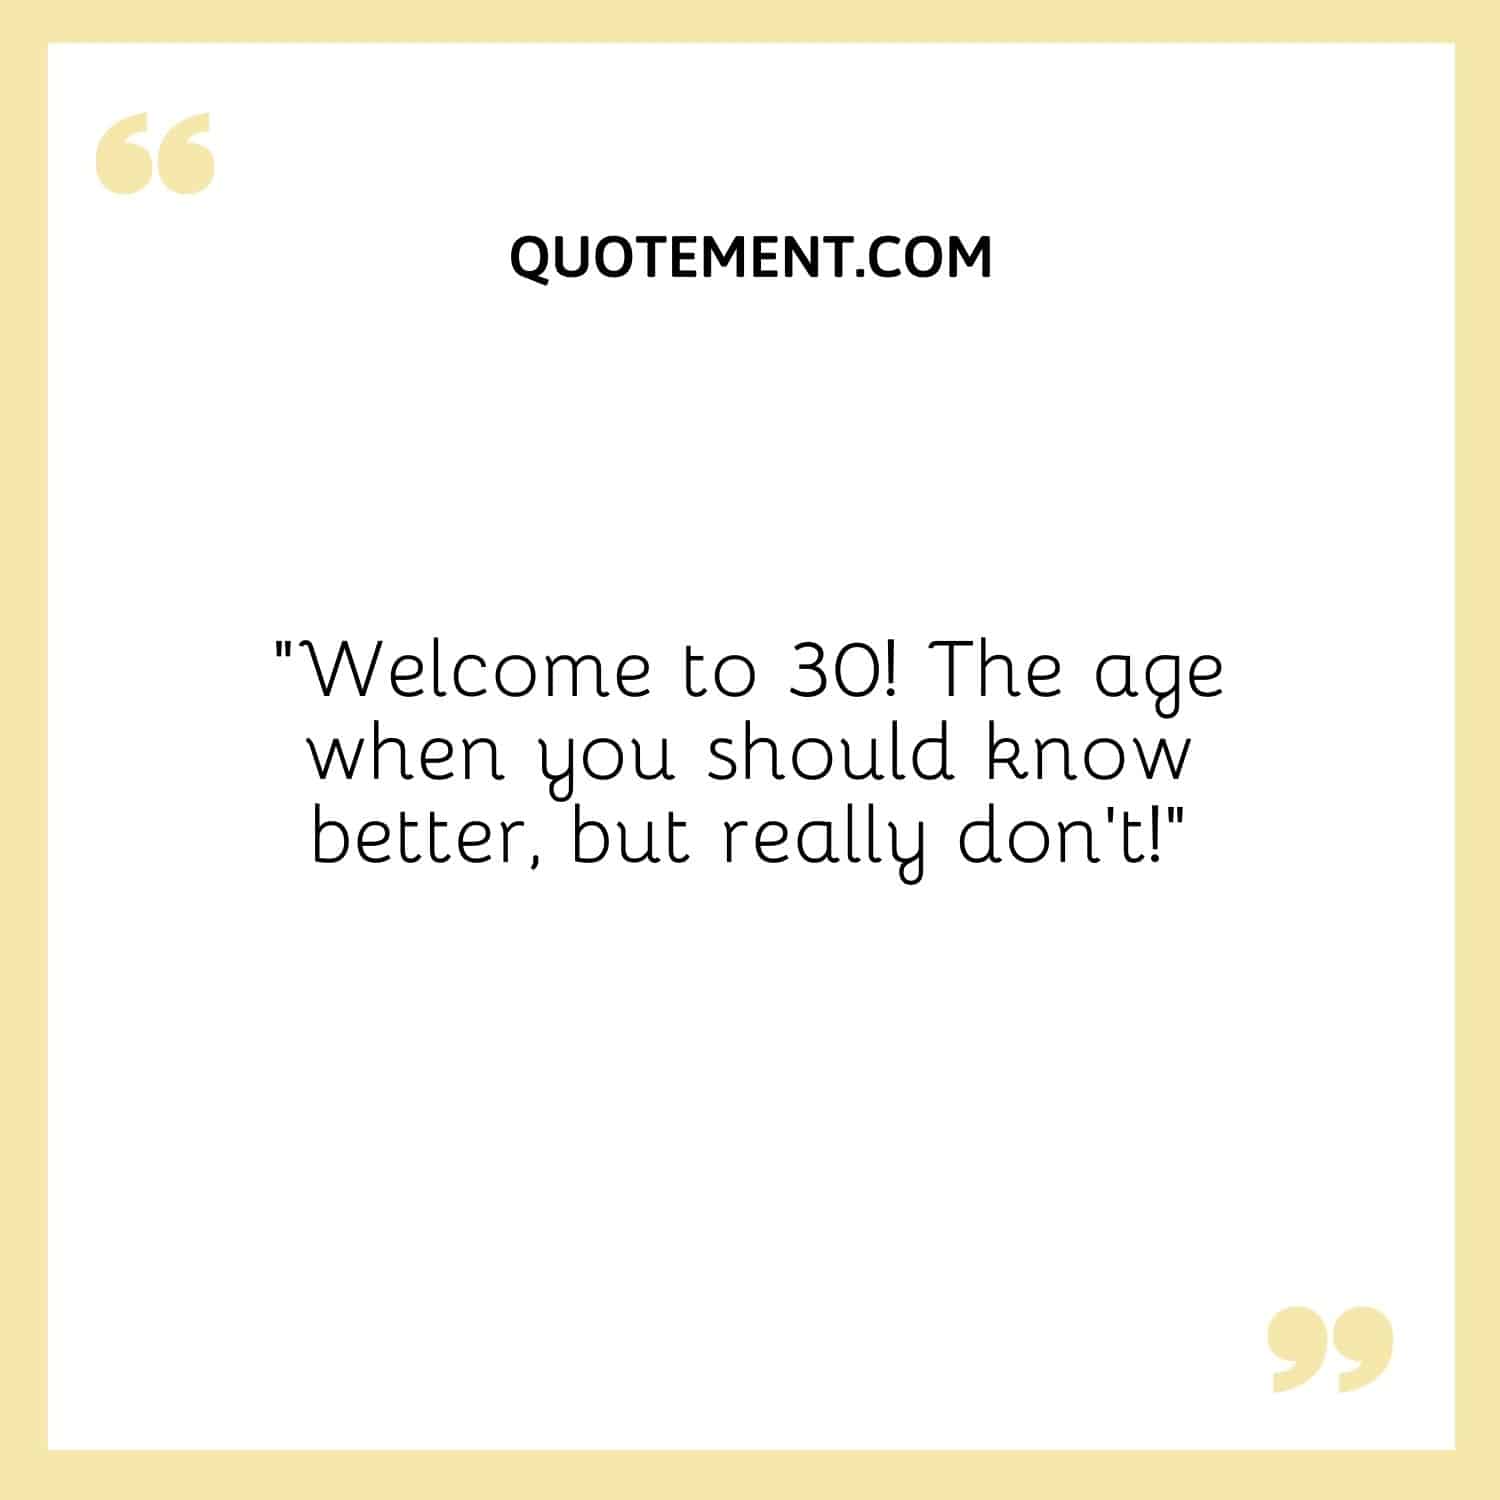 “Welcome to 30! The age when you should know better, but really don’t!”